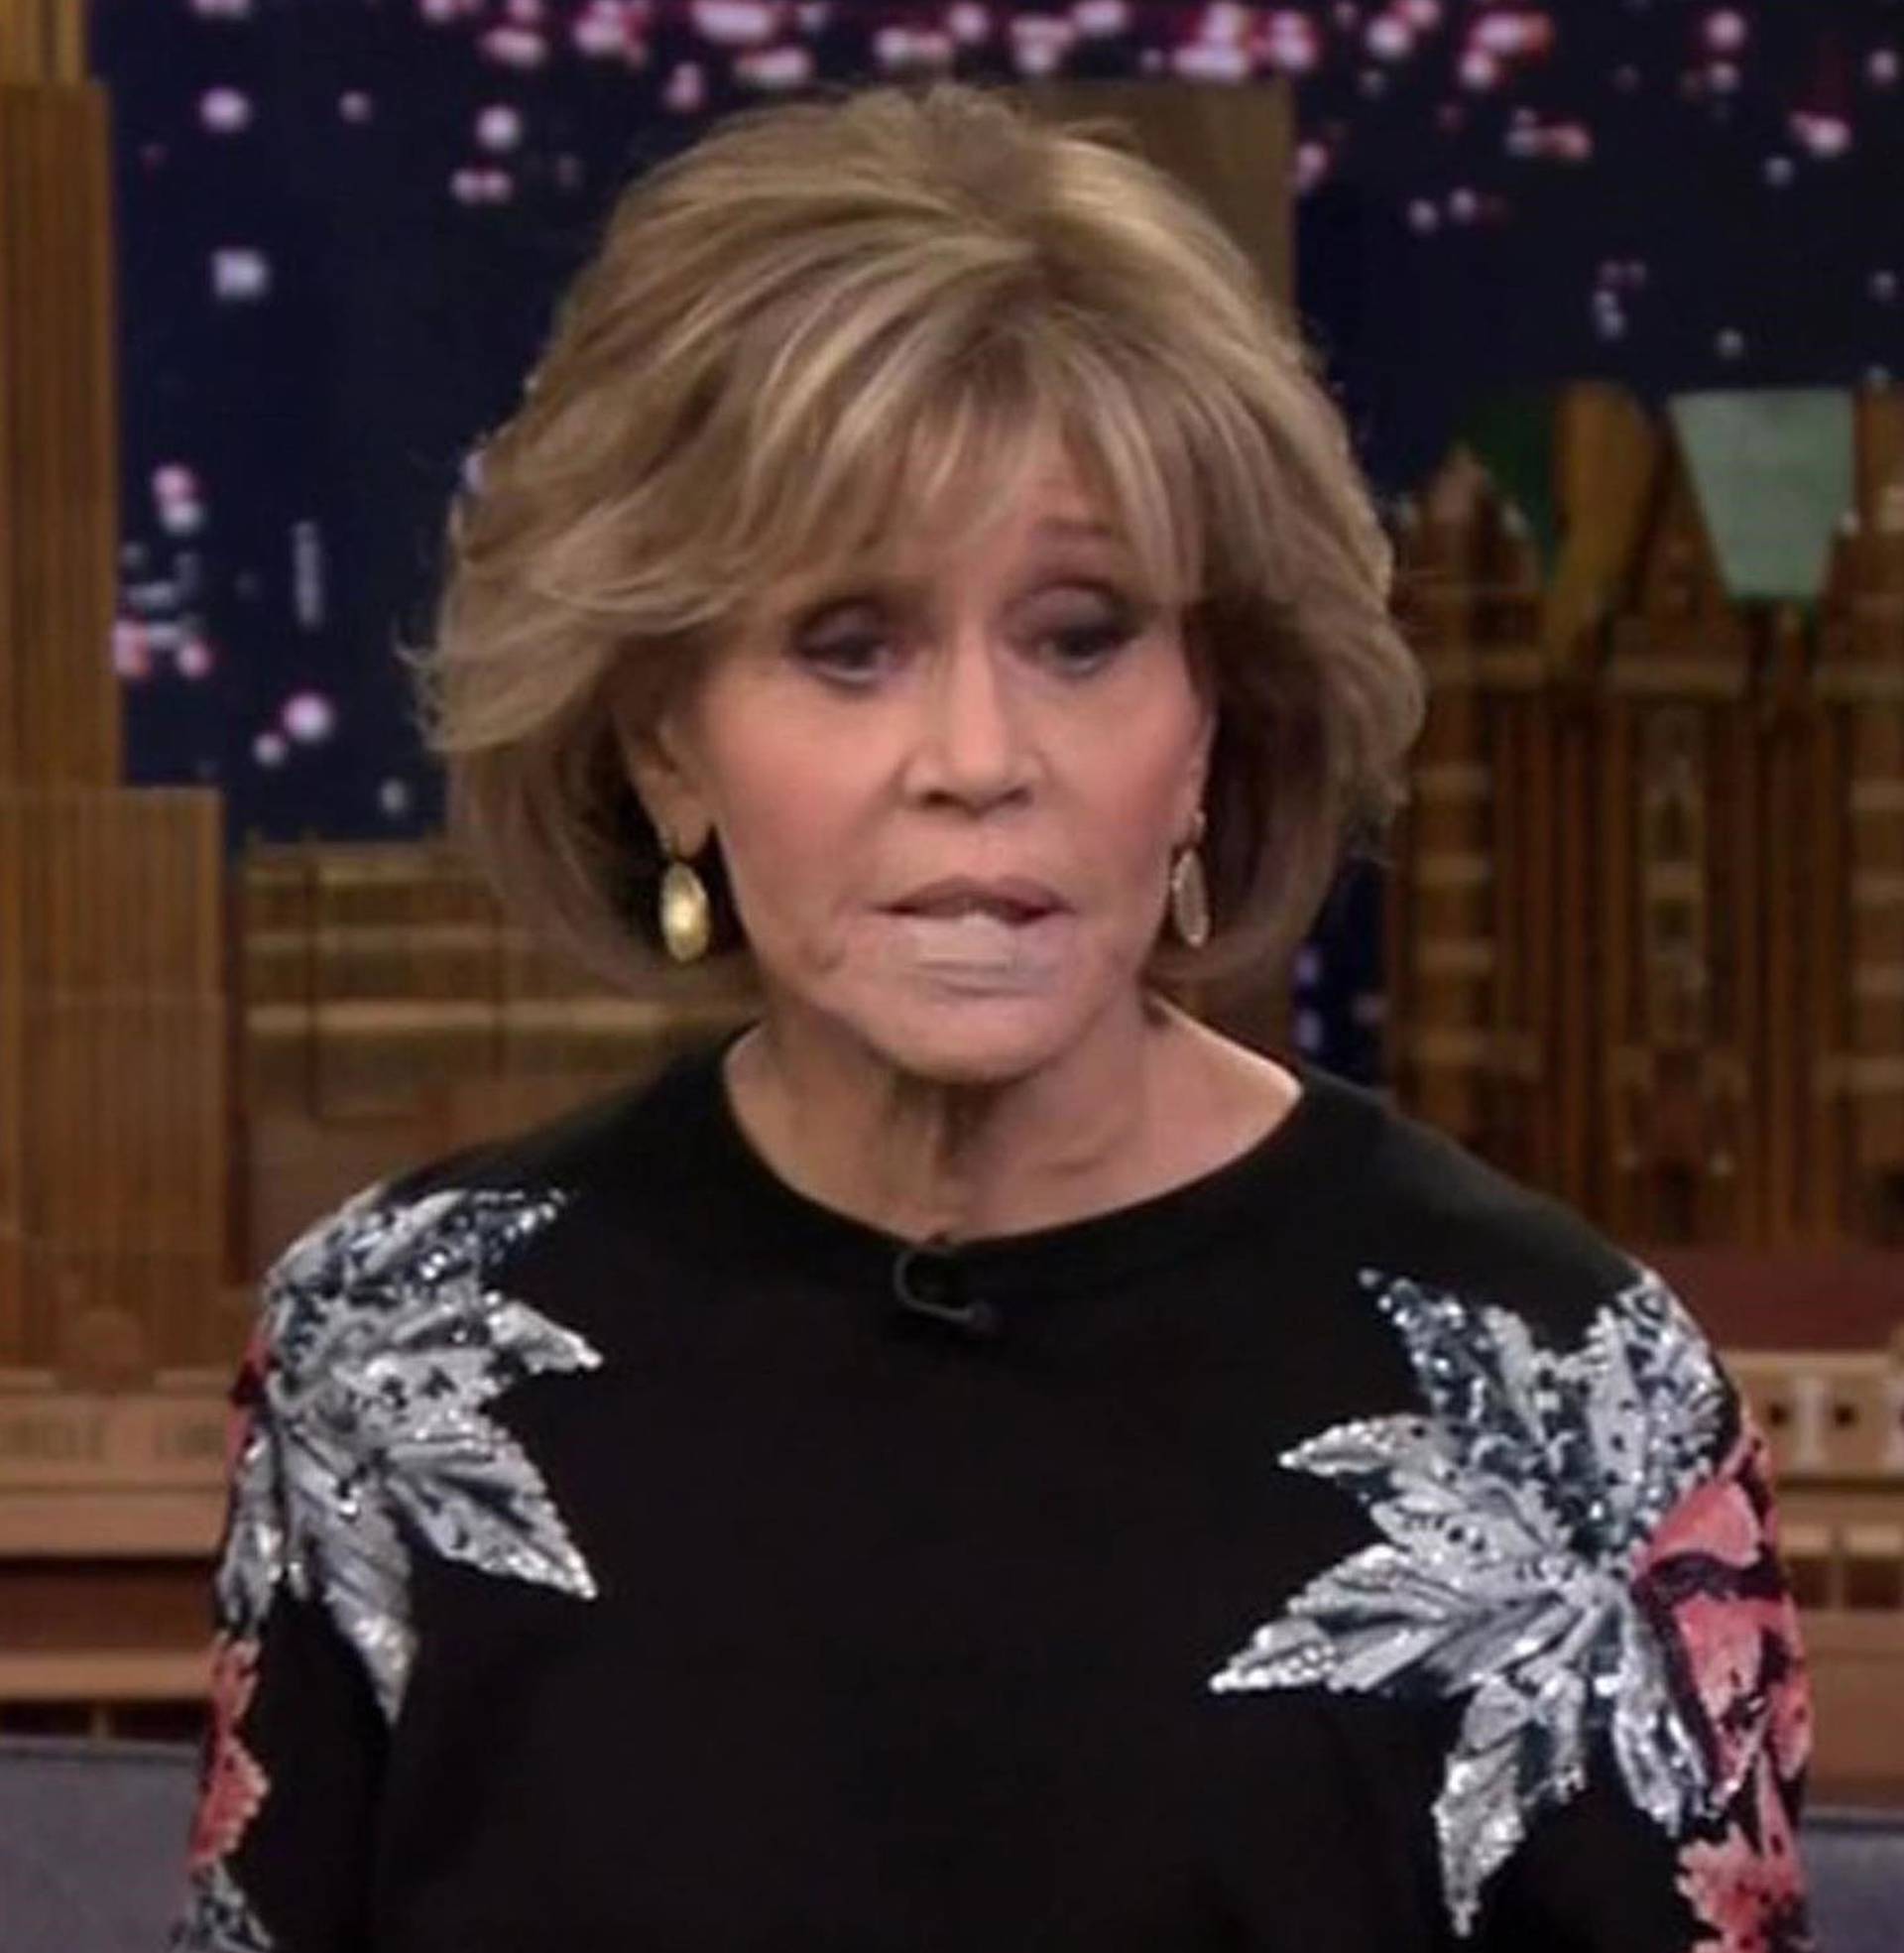 Jane Fonda wears bandage on her face for Tonight Show interview as she reveals she had cancerous growth removed from her lower lip